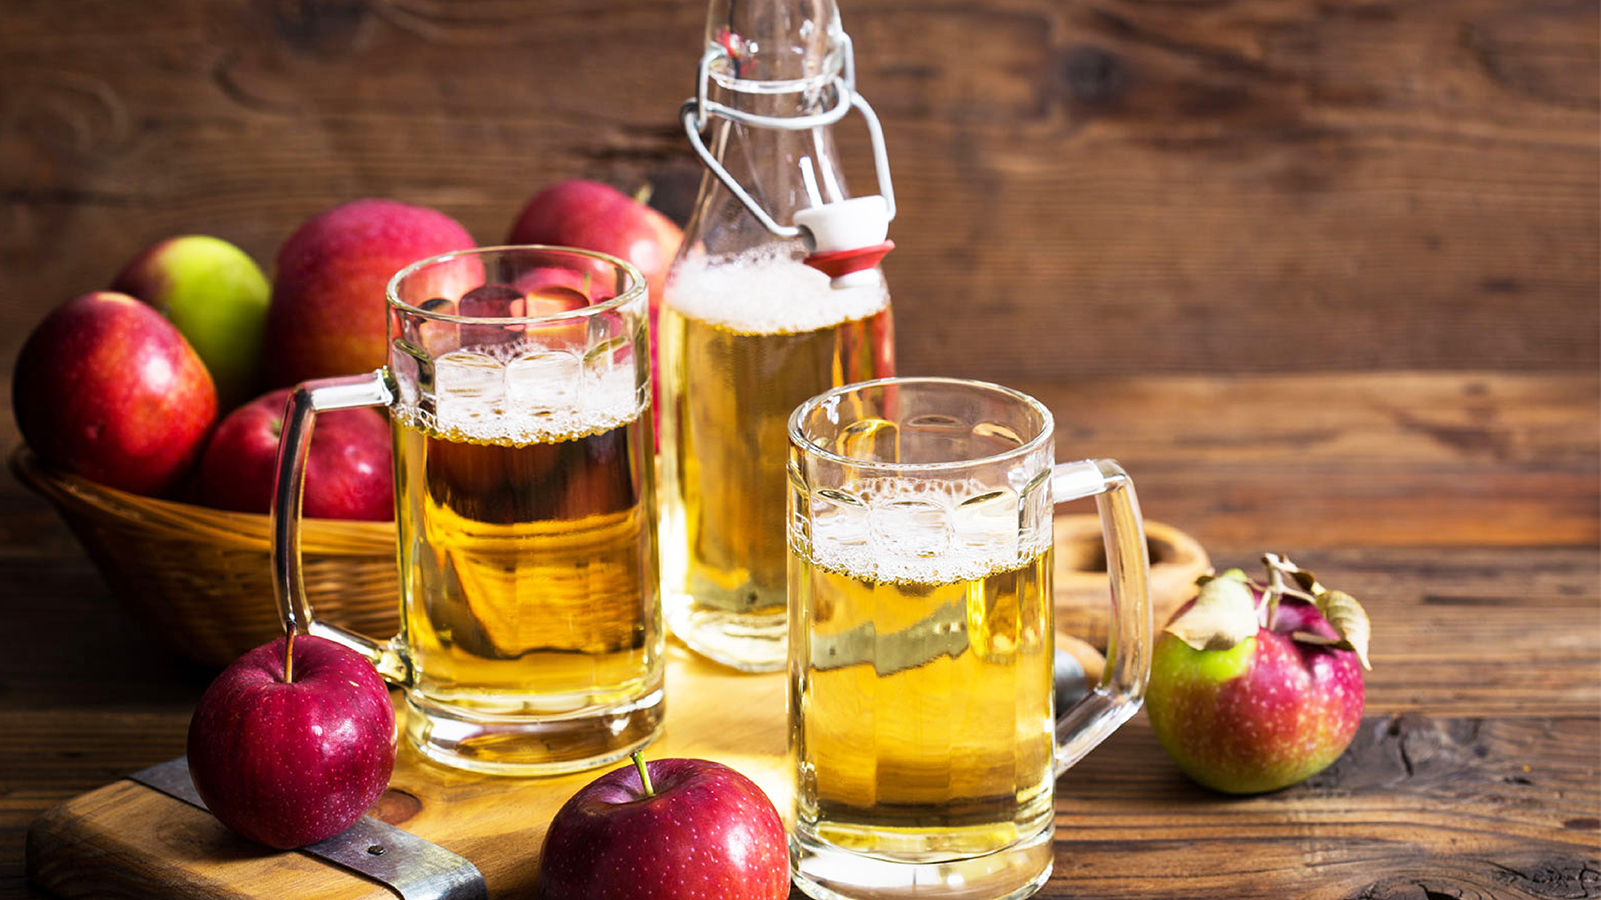 Cider becomes mainstream as young consumers dictate the pace